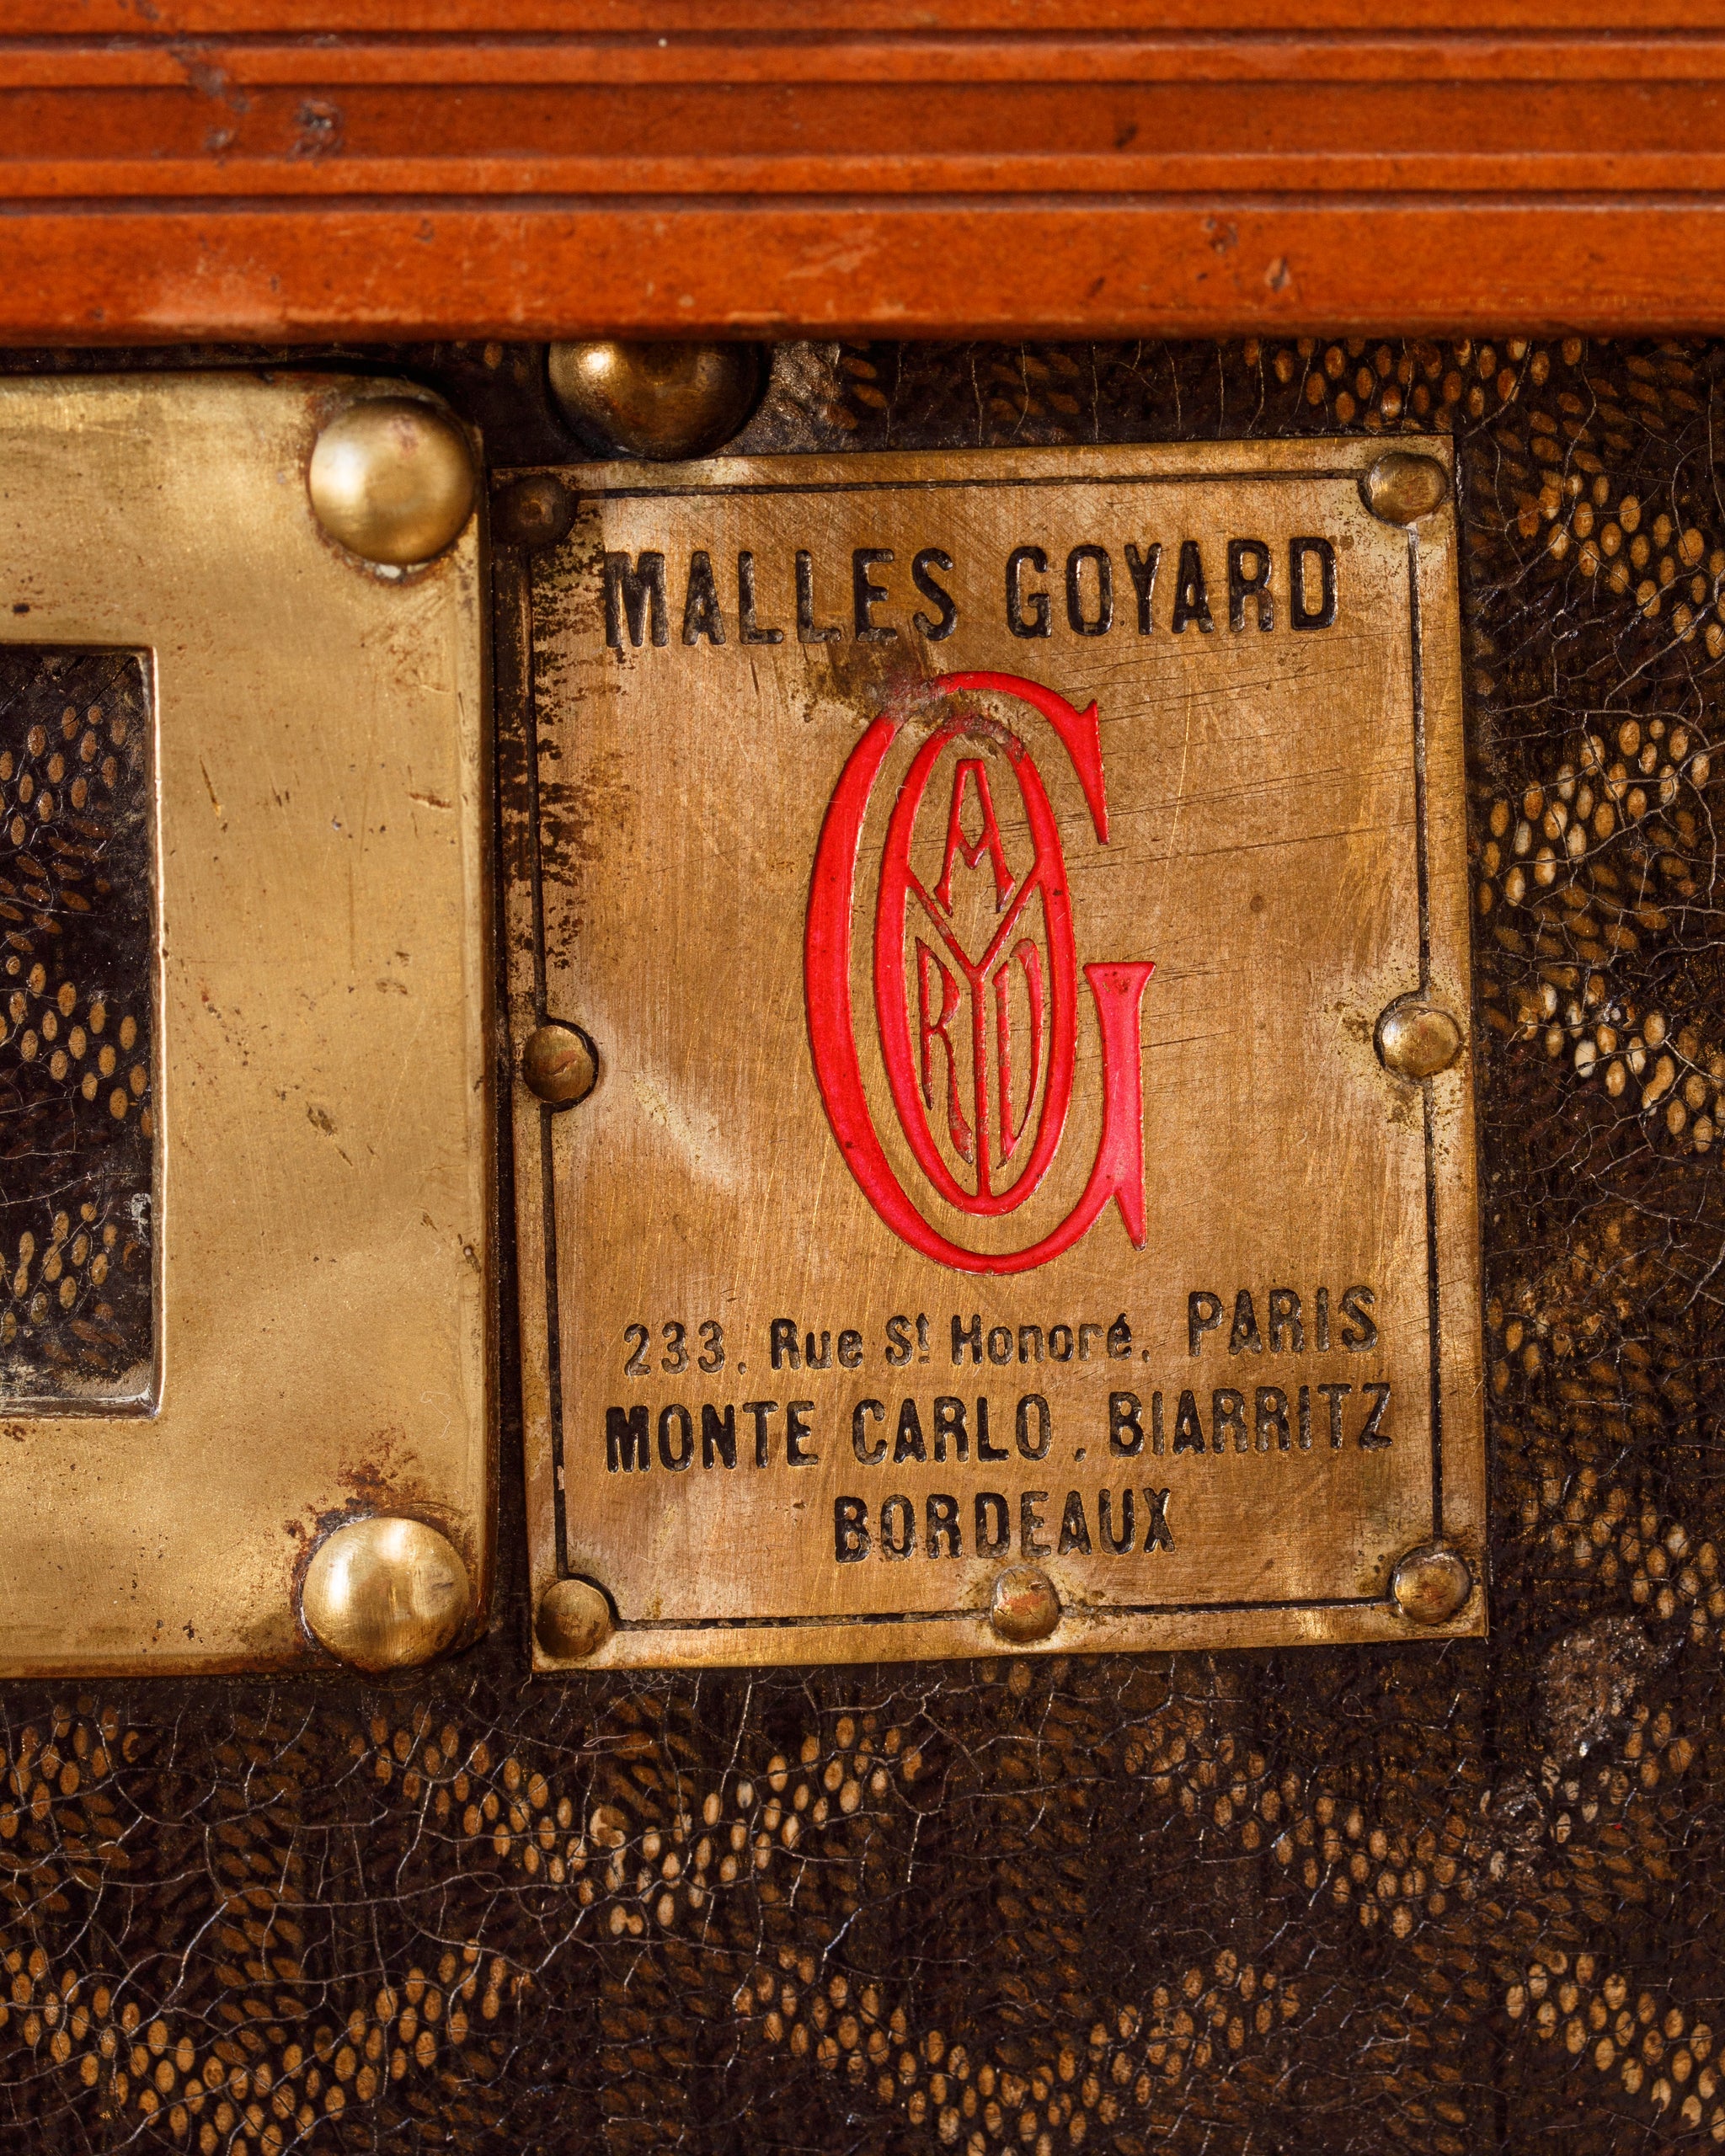 here is one for our watch collectors! a Goyard watch trunk with